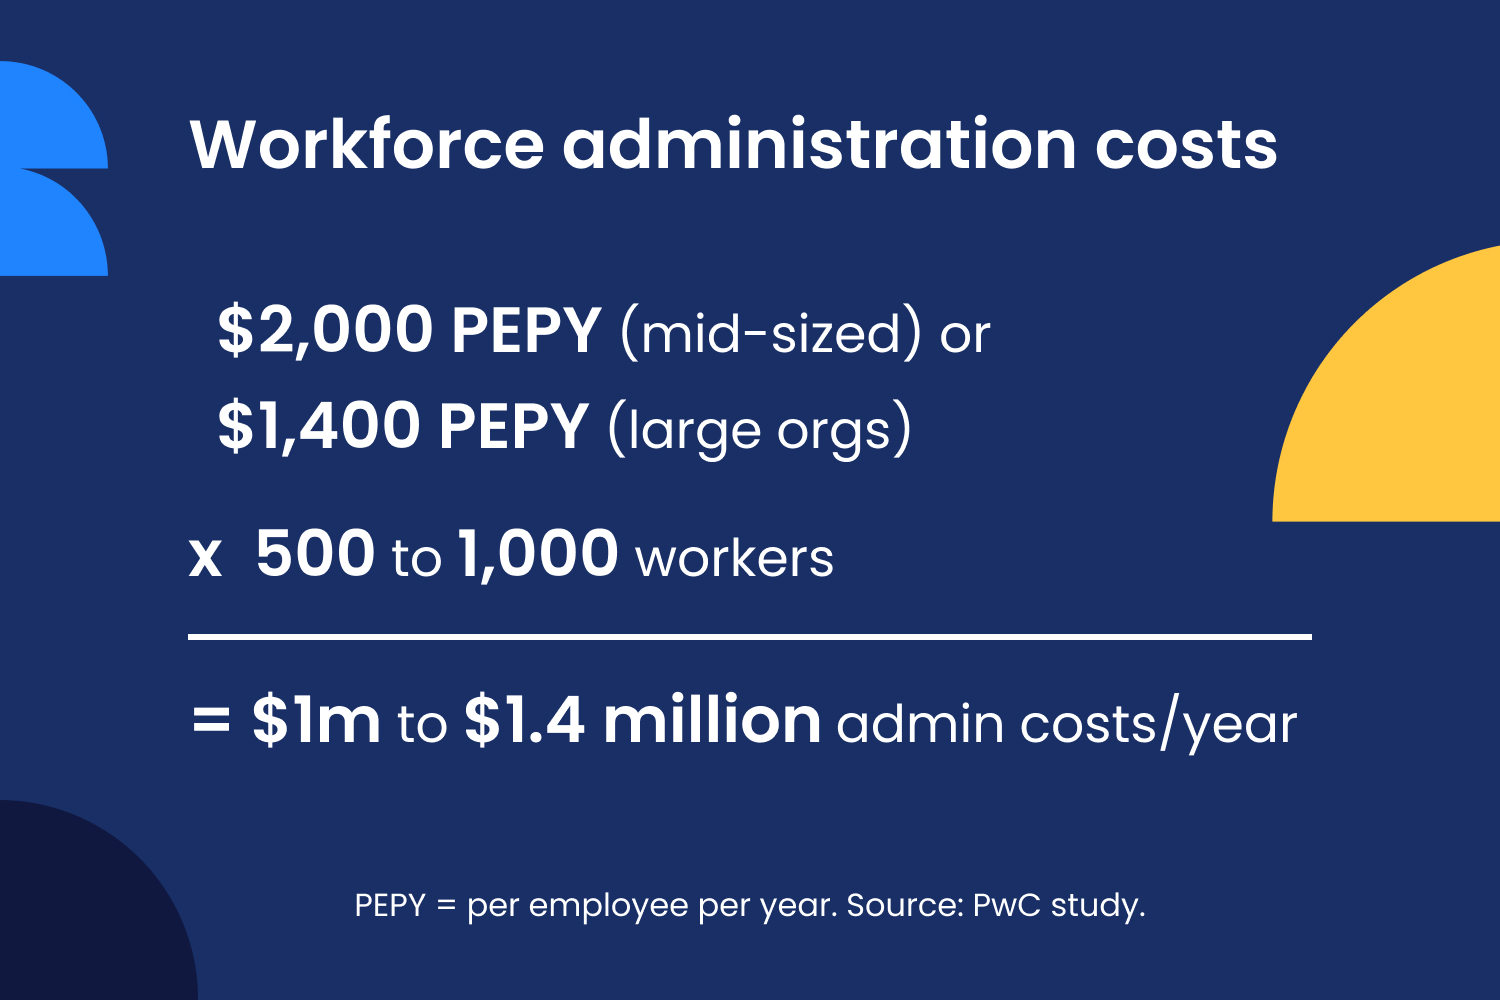 the true cost of workforce administration on mid-sized and large orgs